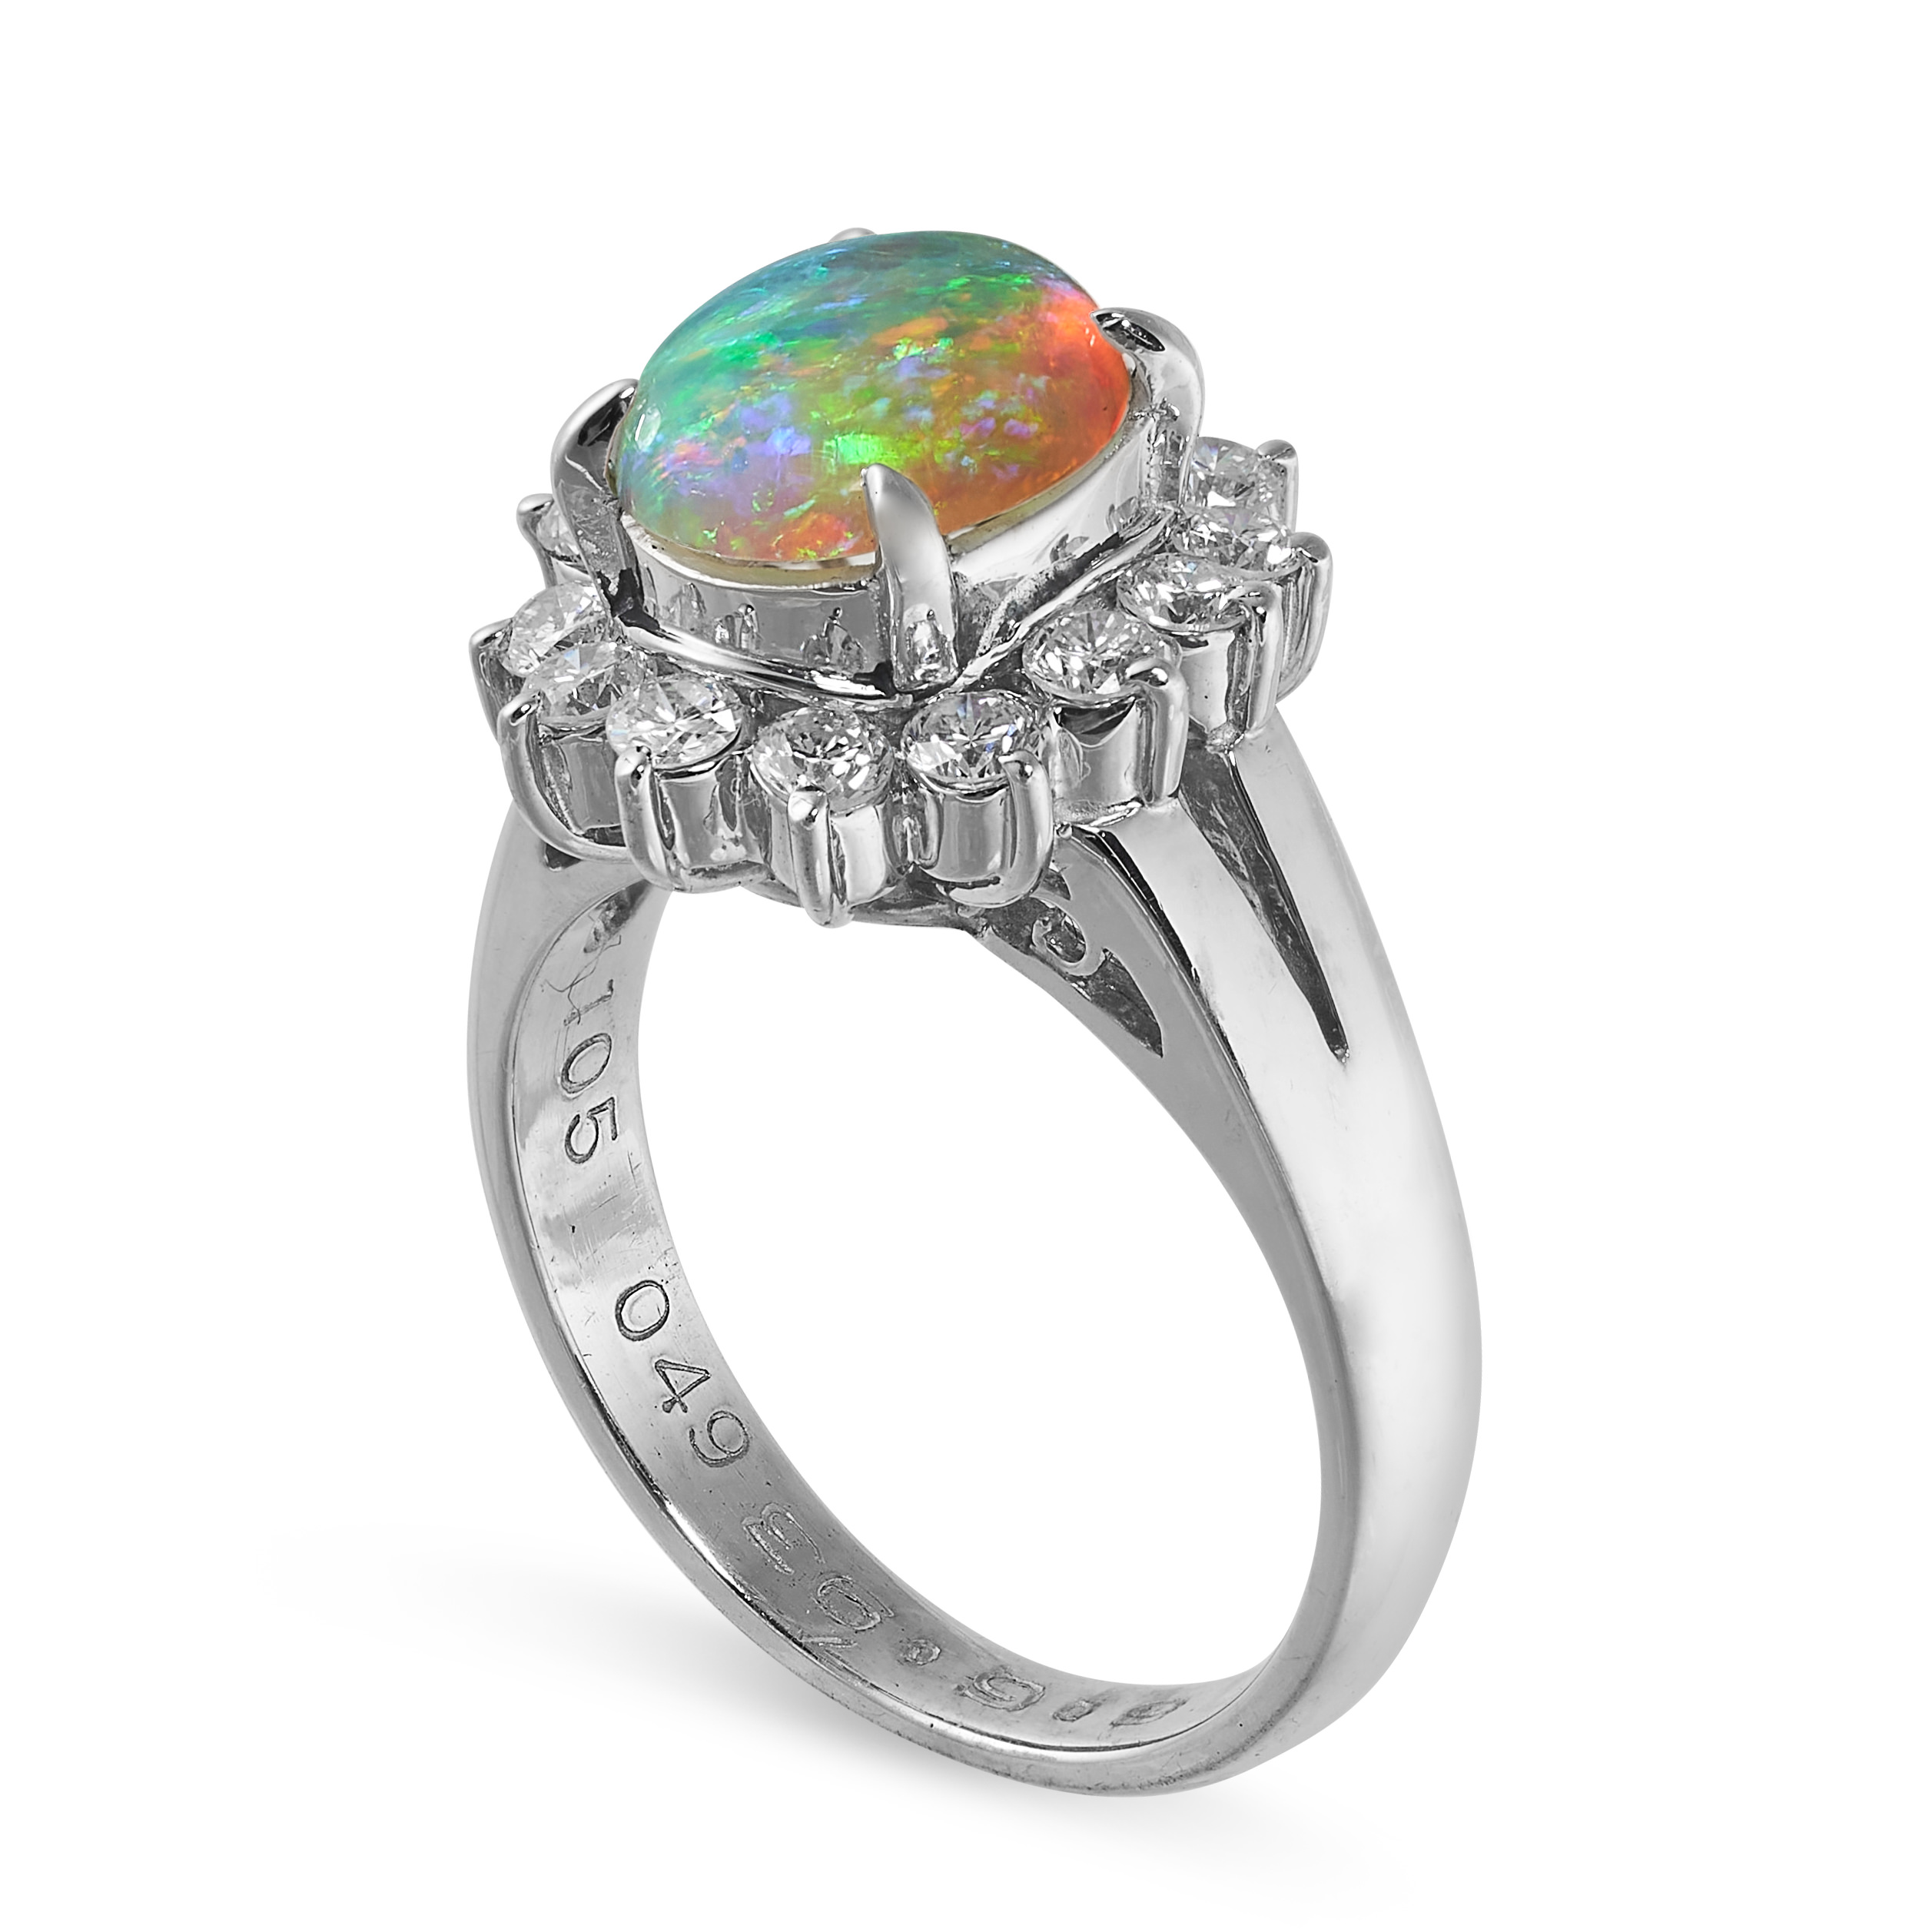 AN OPAL AND DIAMOND RING set with an oval cabochon opal in a cluster of brilliant cut diamonds, - Image 2 of 2